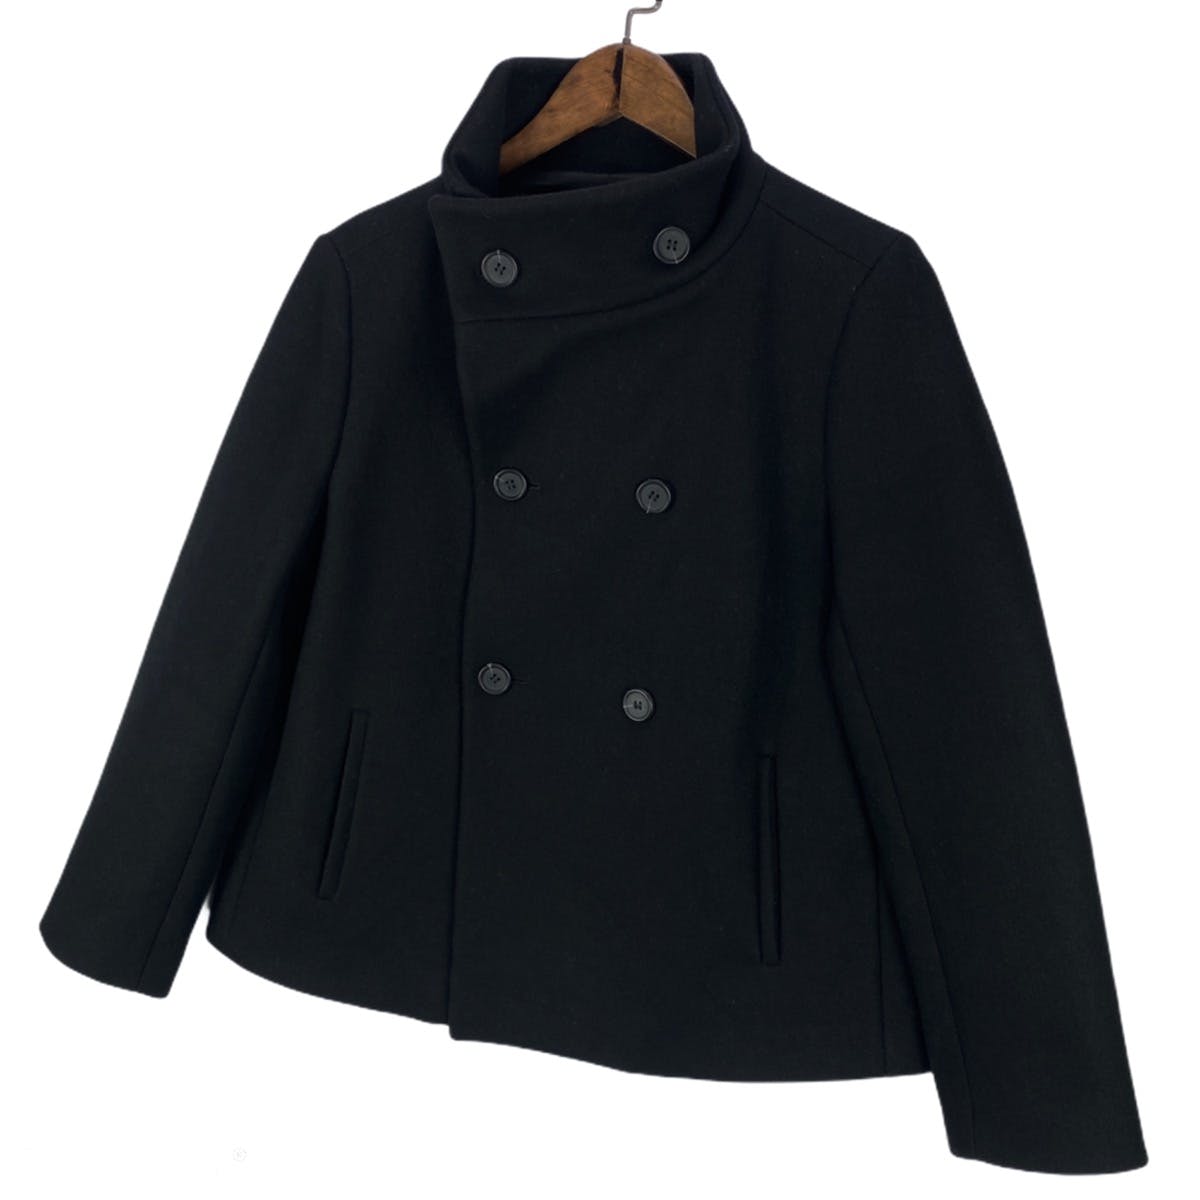 A.P.C Peacoat Wool Cropped Jacket Made In Poland - 8